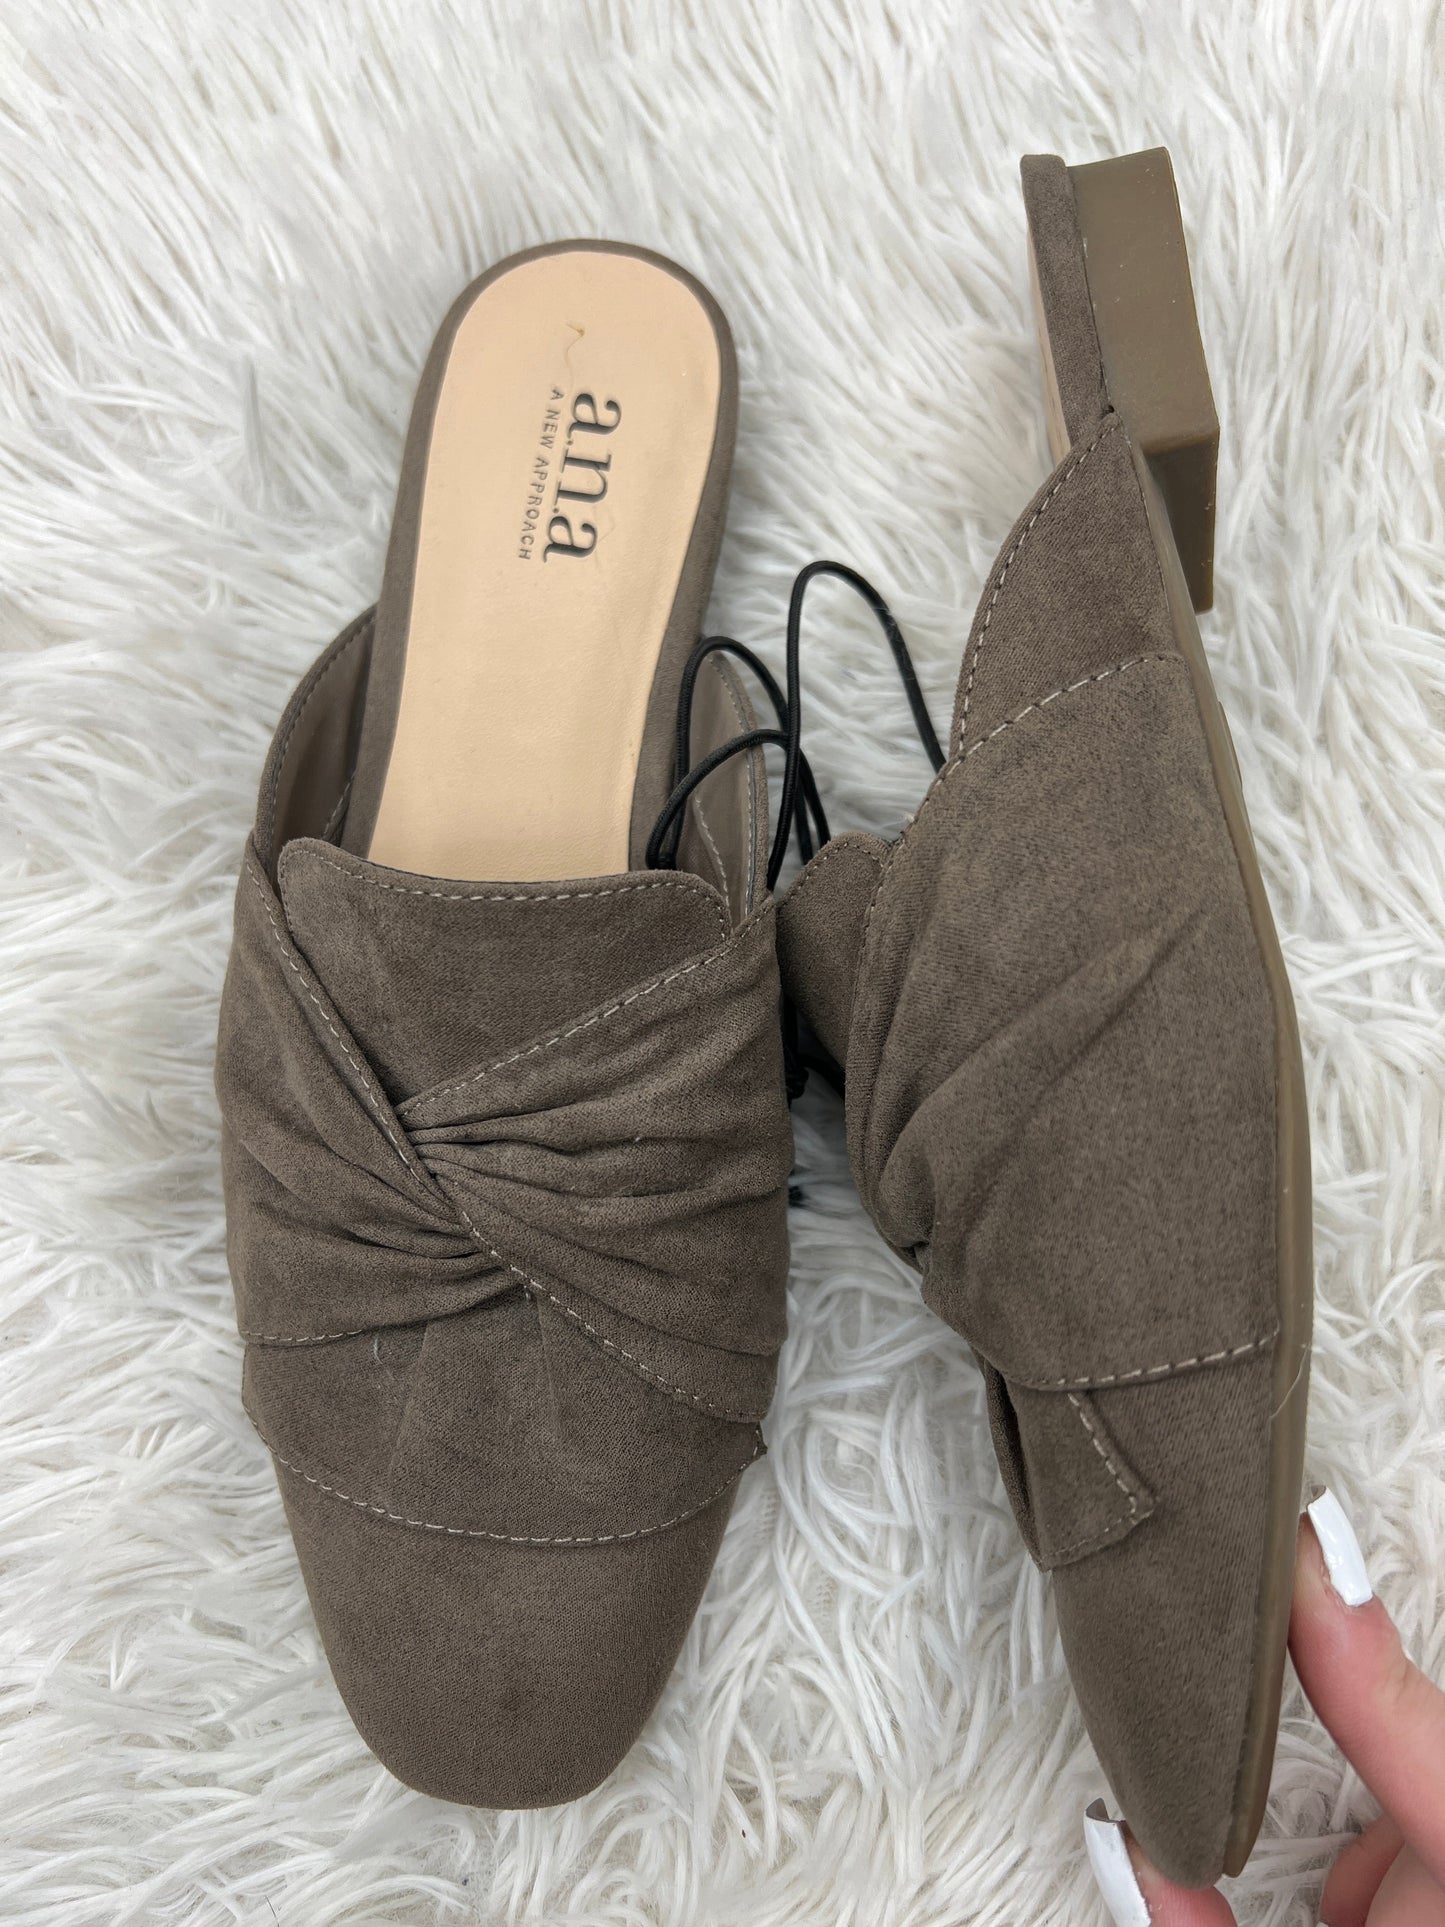 Shoes Flats Mule & Slide By Ana  Size: 6.5